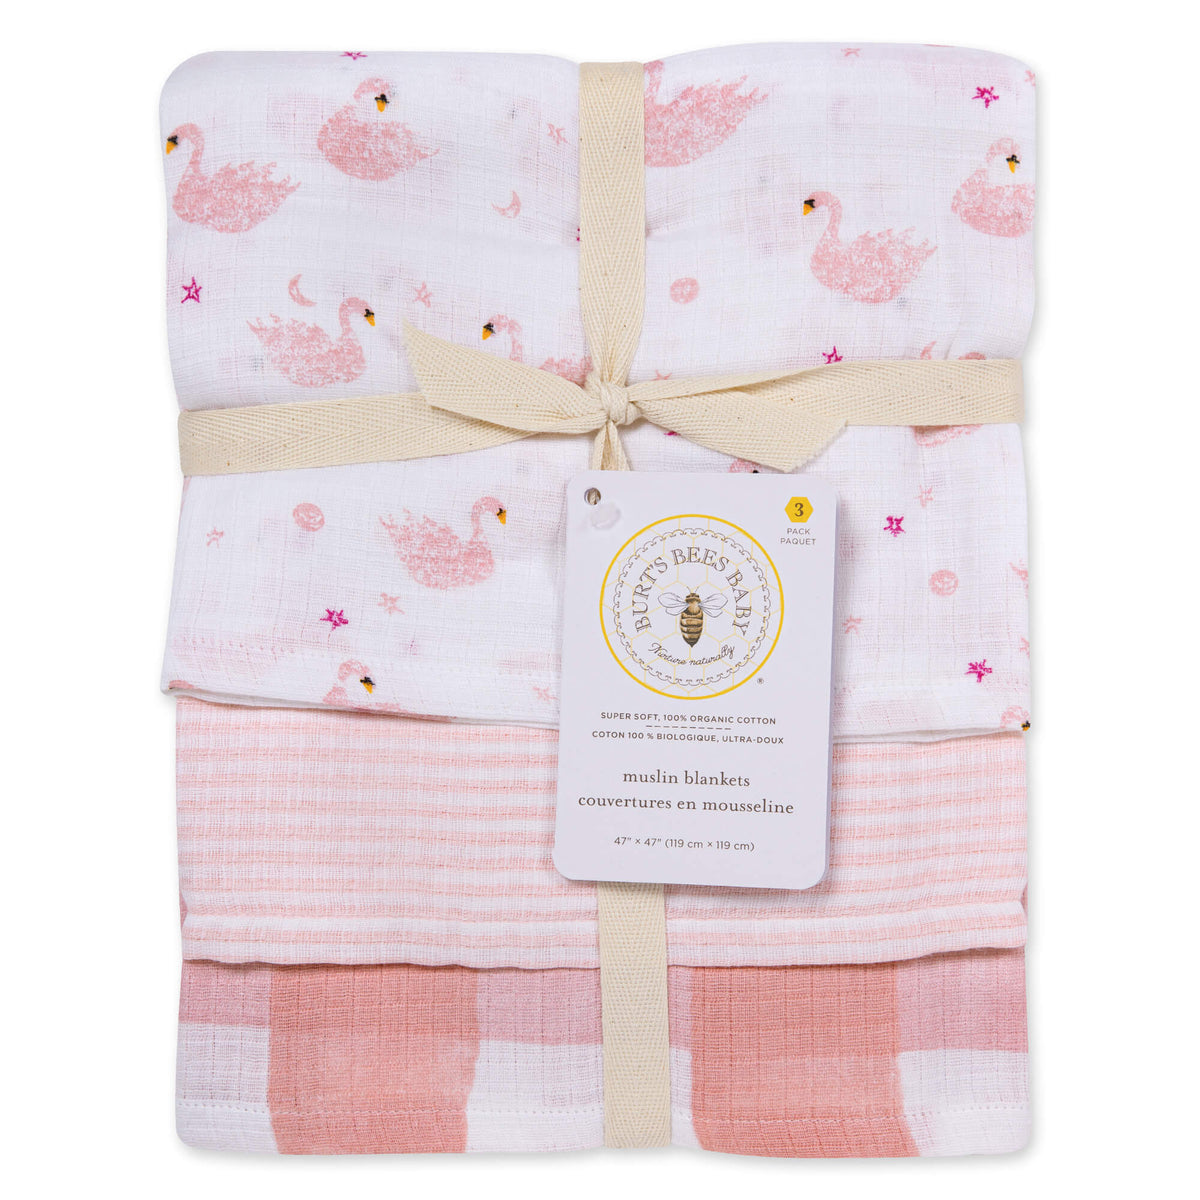 Organic Cotton Muslin Products for Sensitive Skin